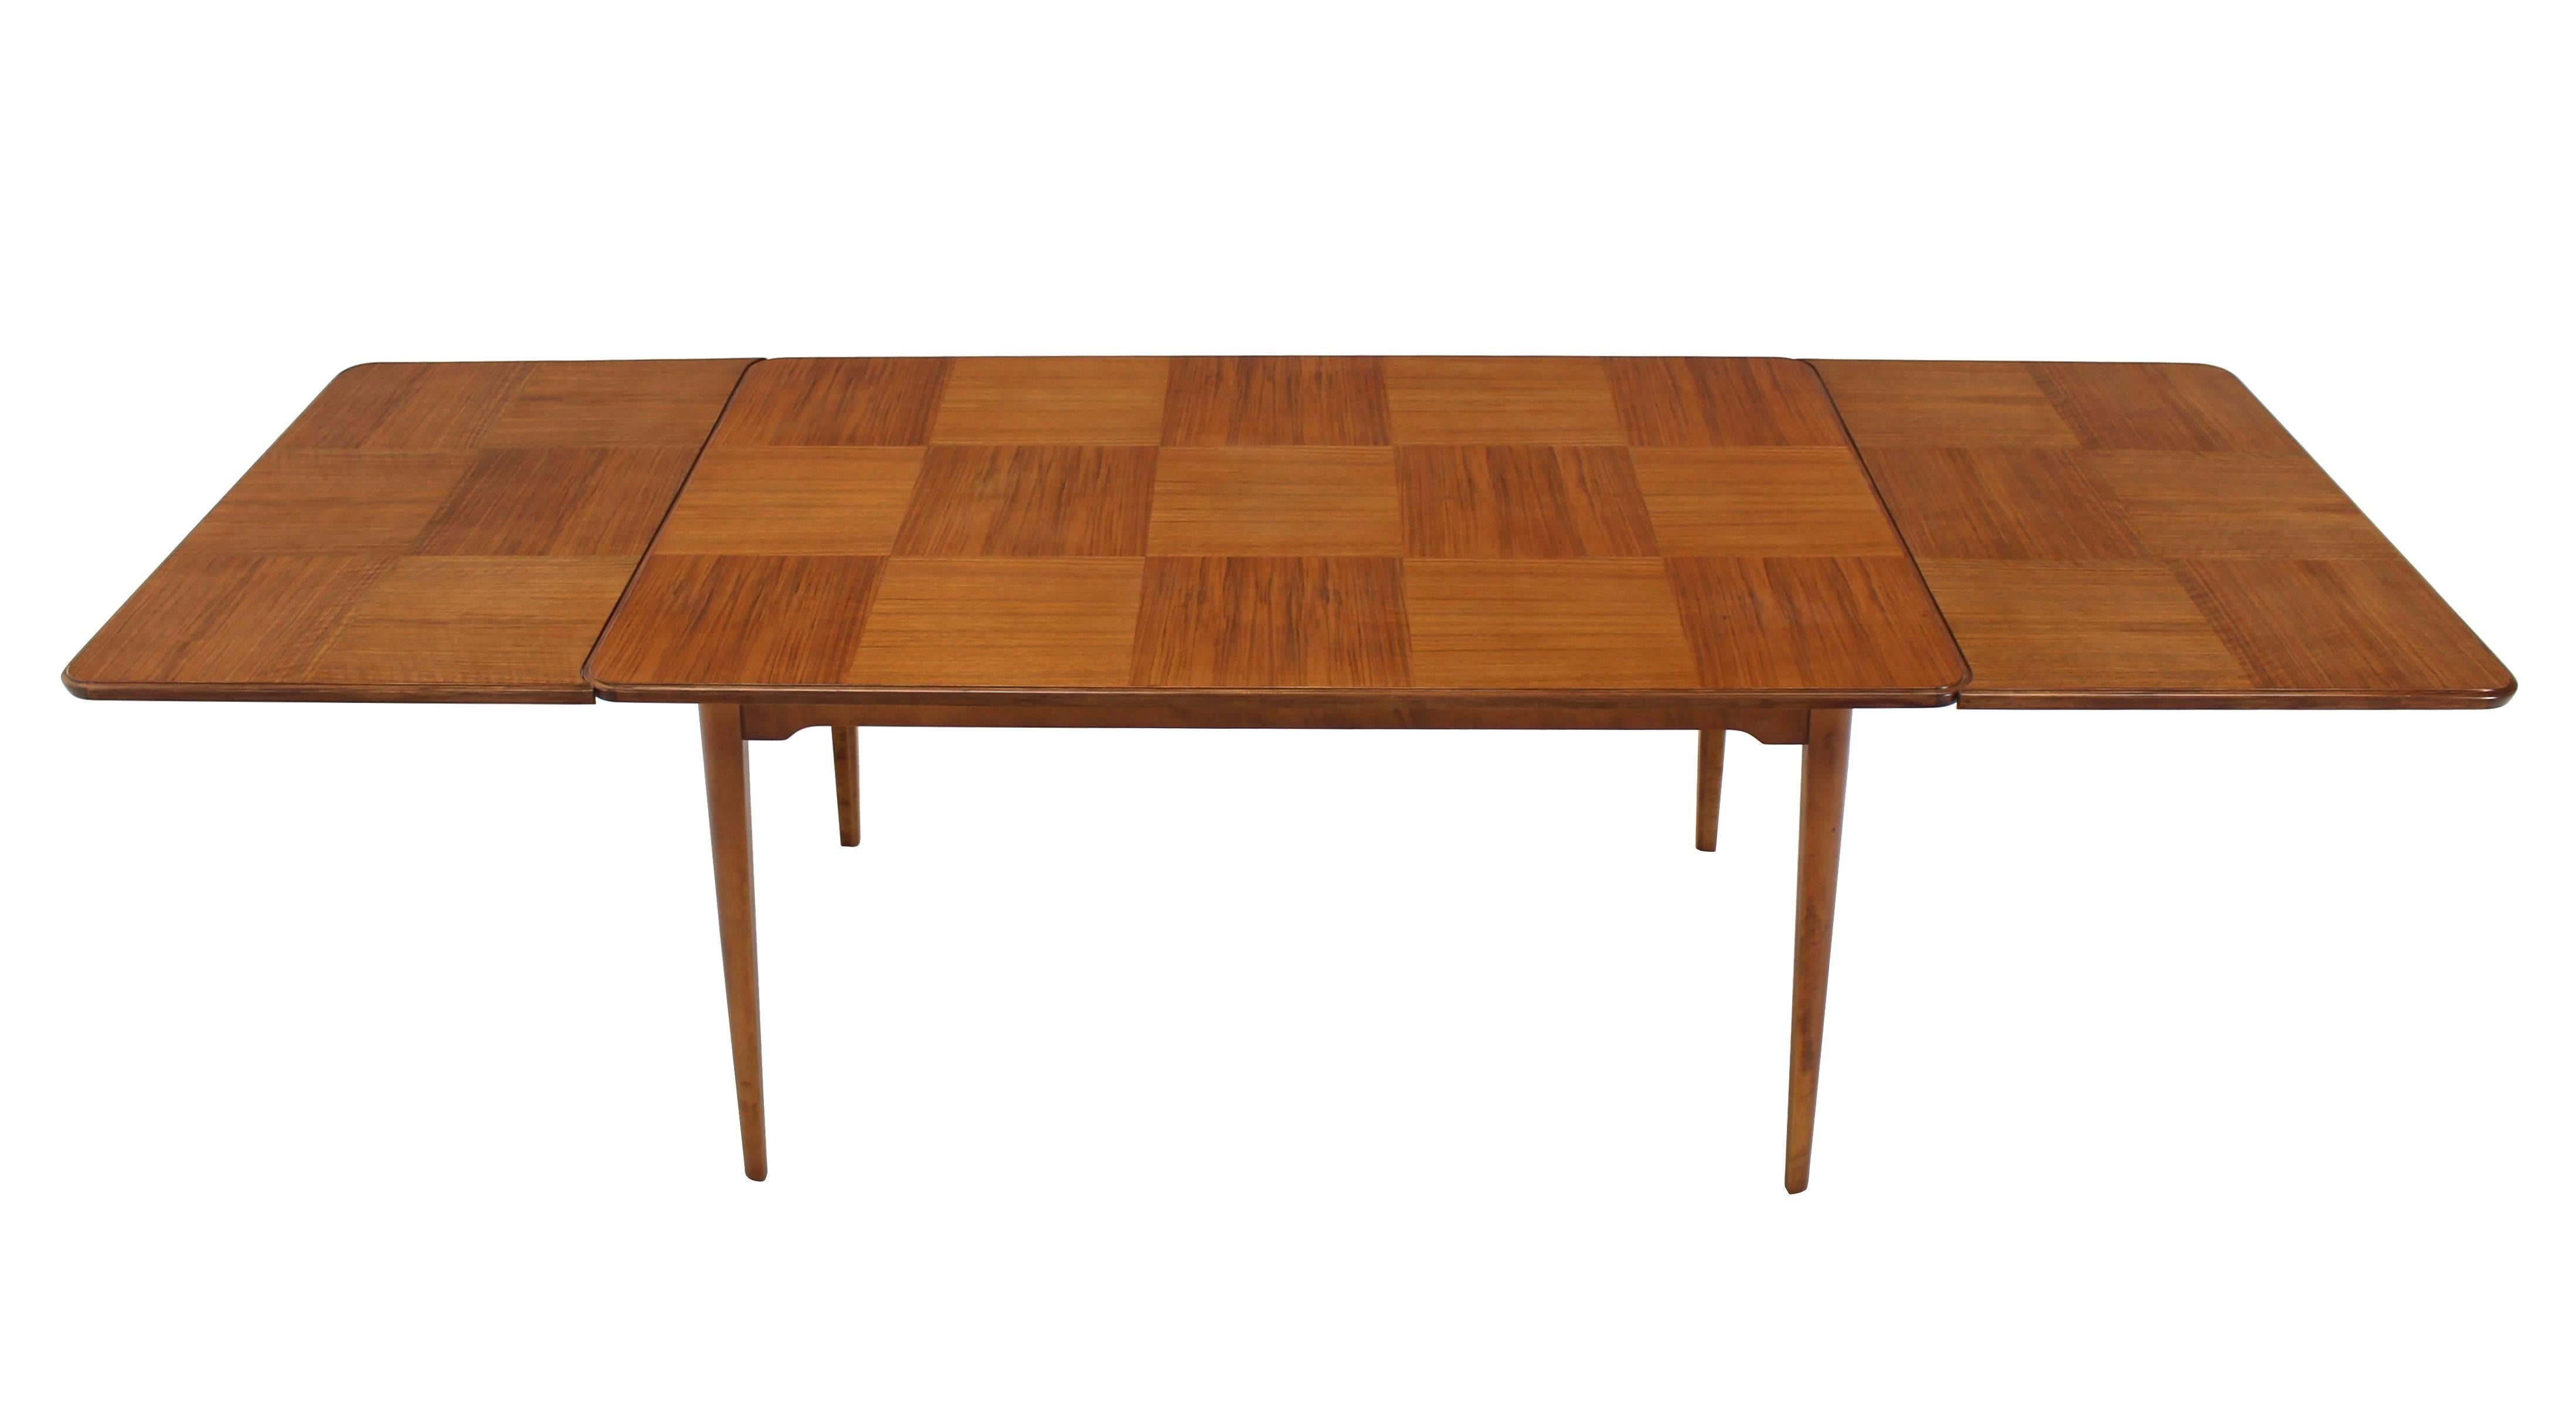 Very nice Mid-Century Swedish modern dining table by Edmond Spence. Two 2 x 24" extension leaves.